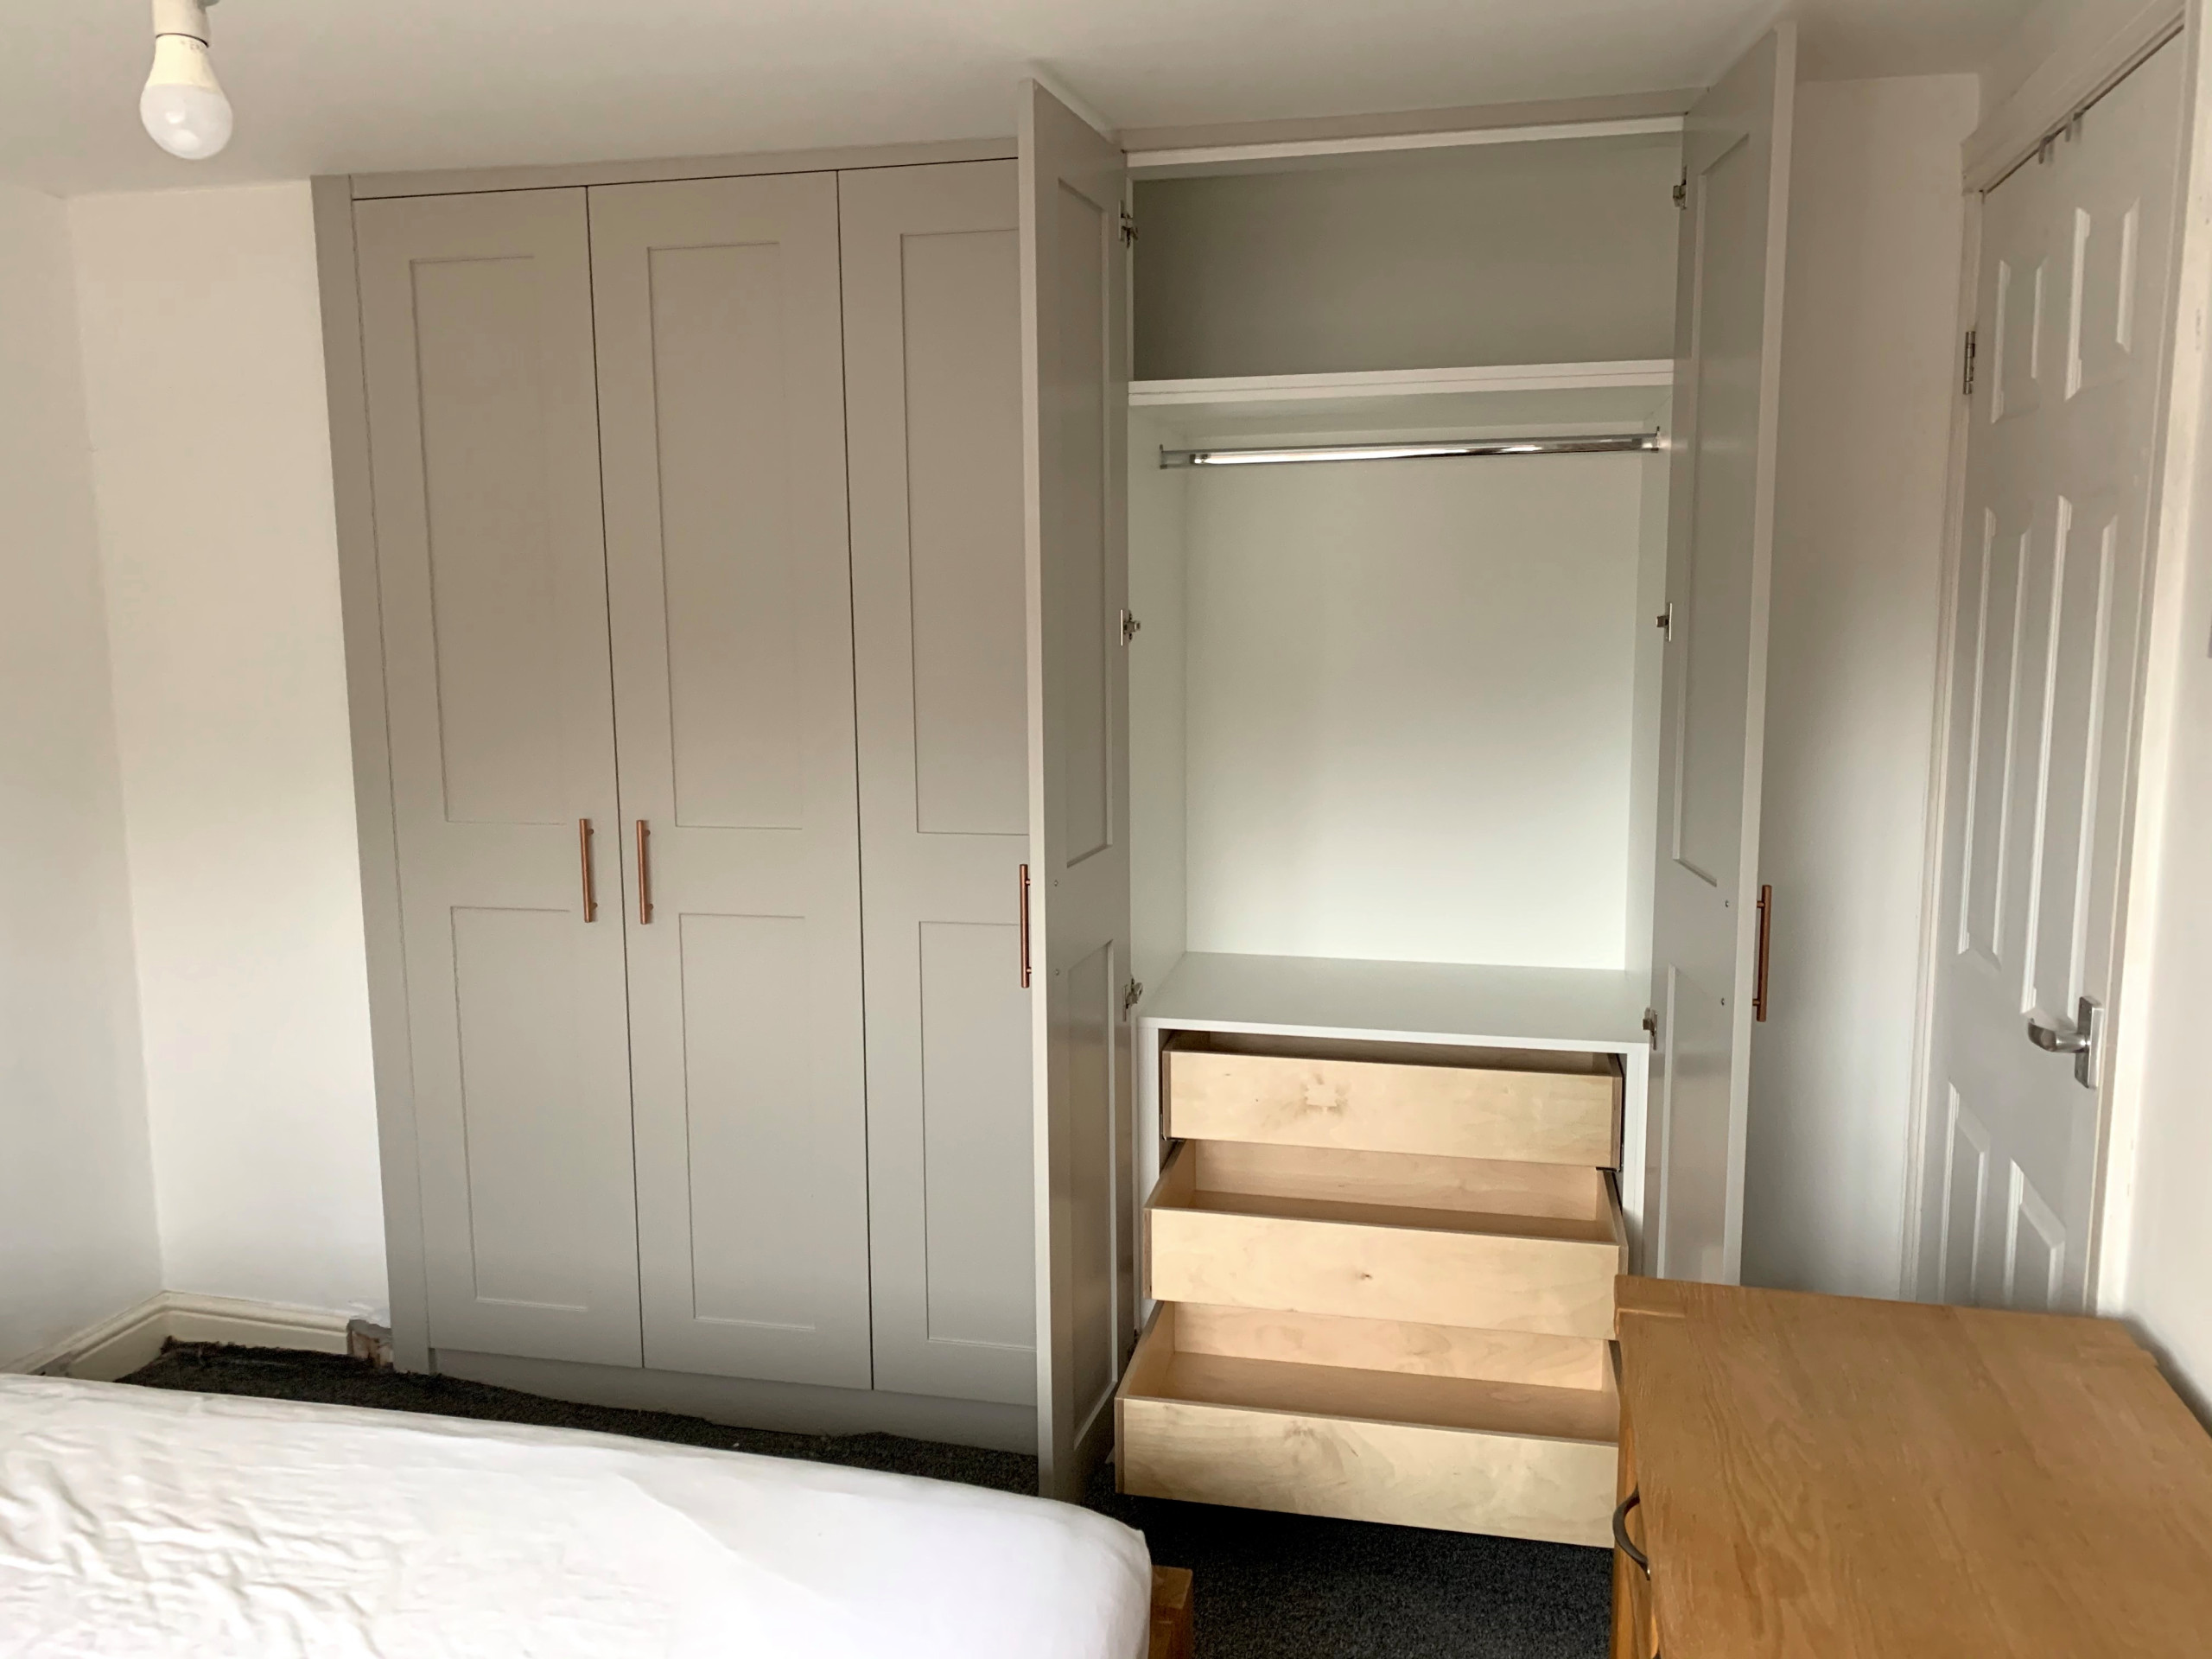 Wardrobes With Shaker Doors Painted in Farrow & Ball 'Purbeck Stone'